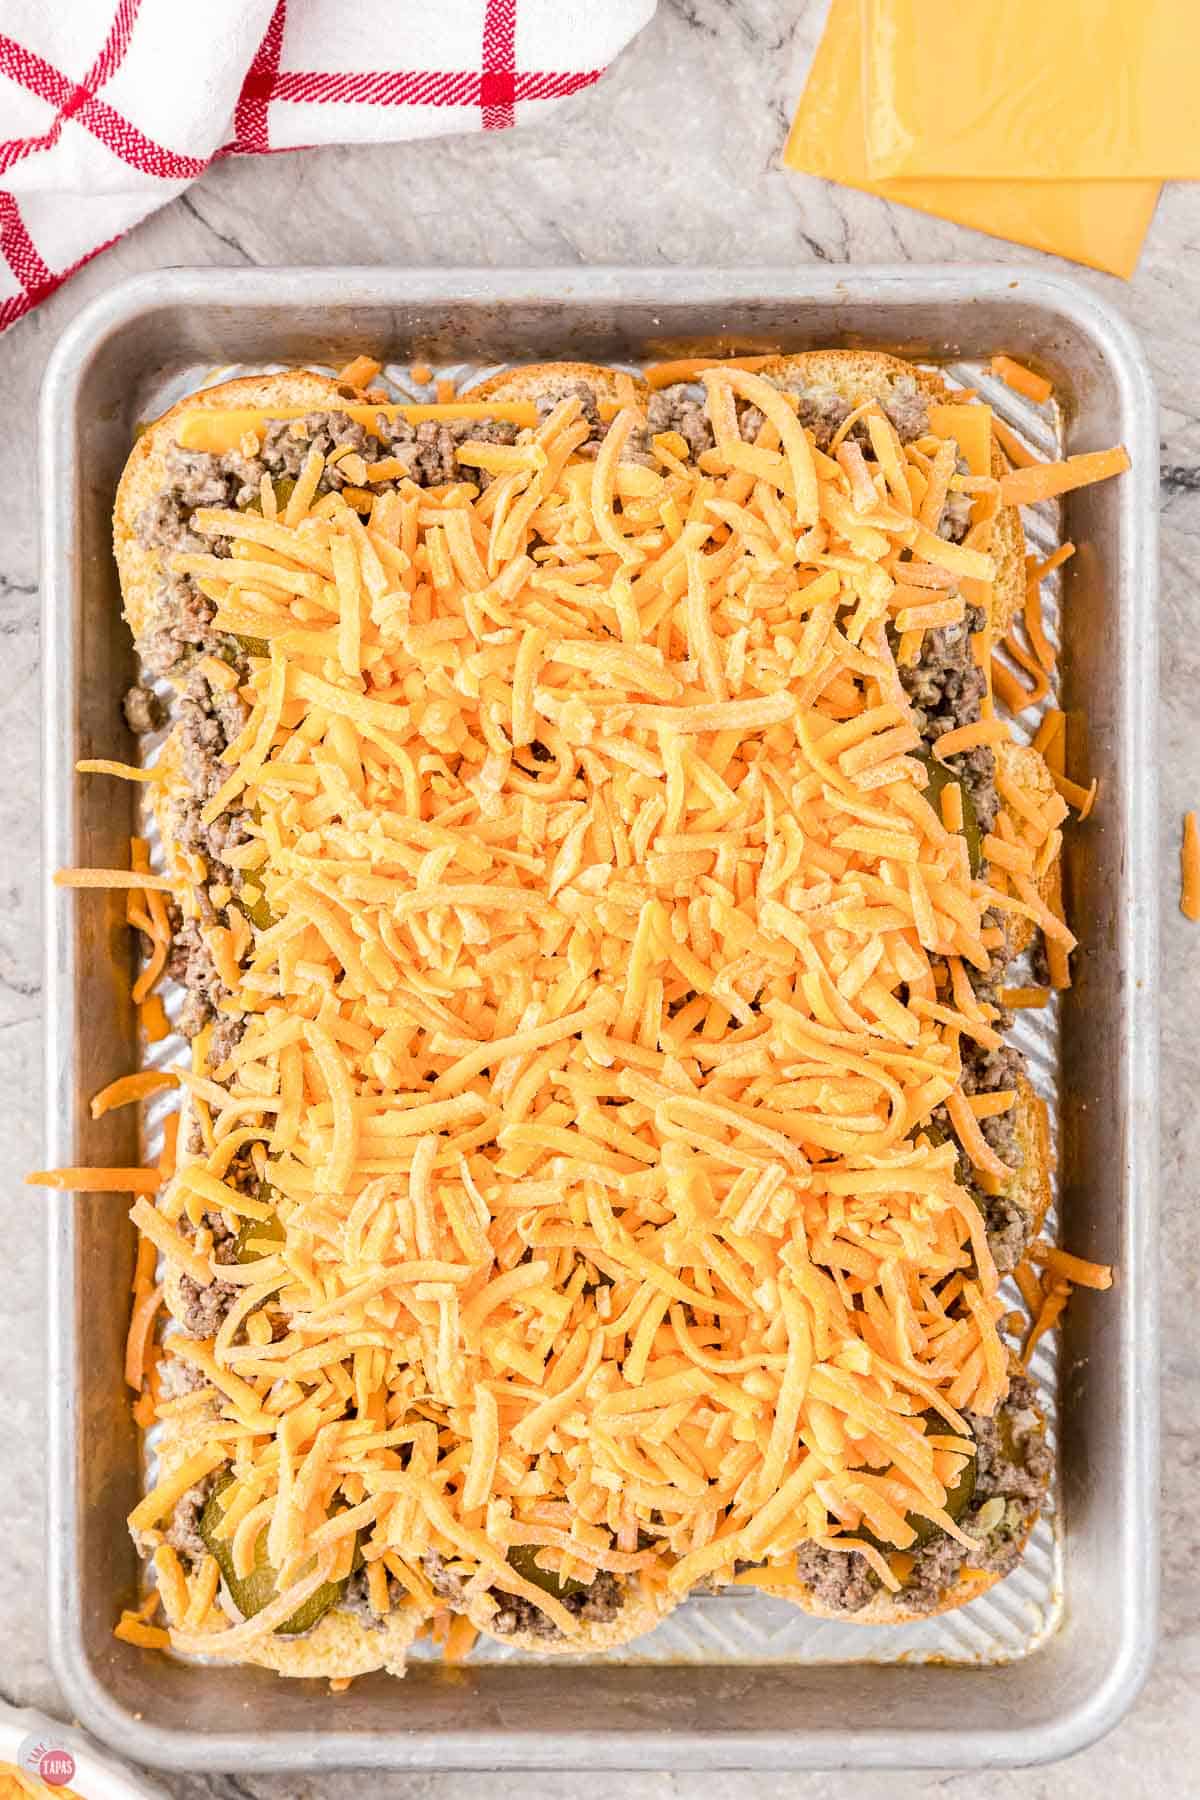 ground beef and shredded cheese on top of buns on a baking dish